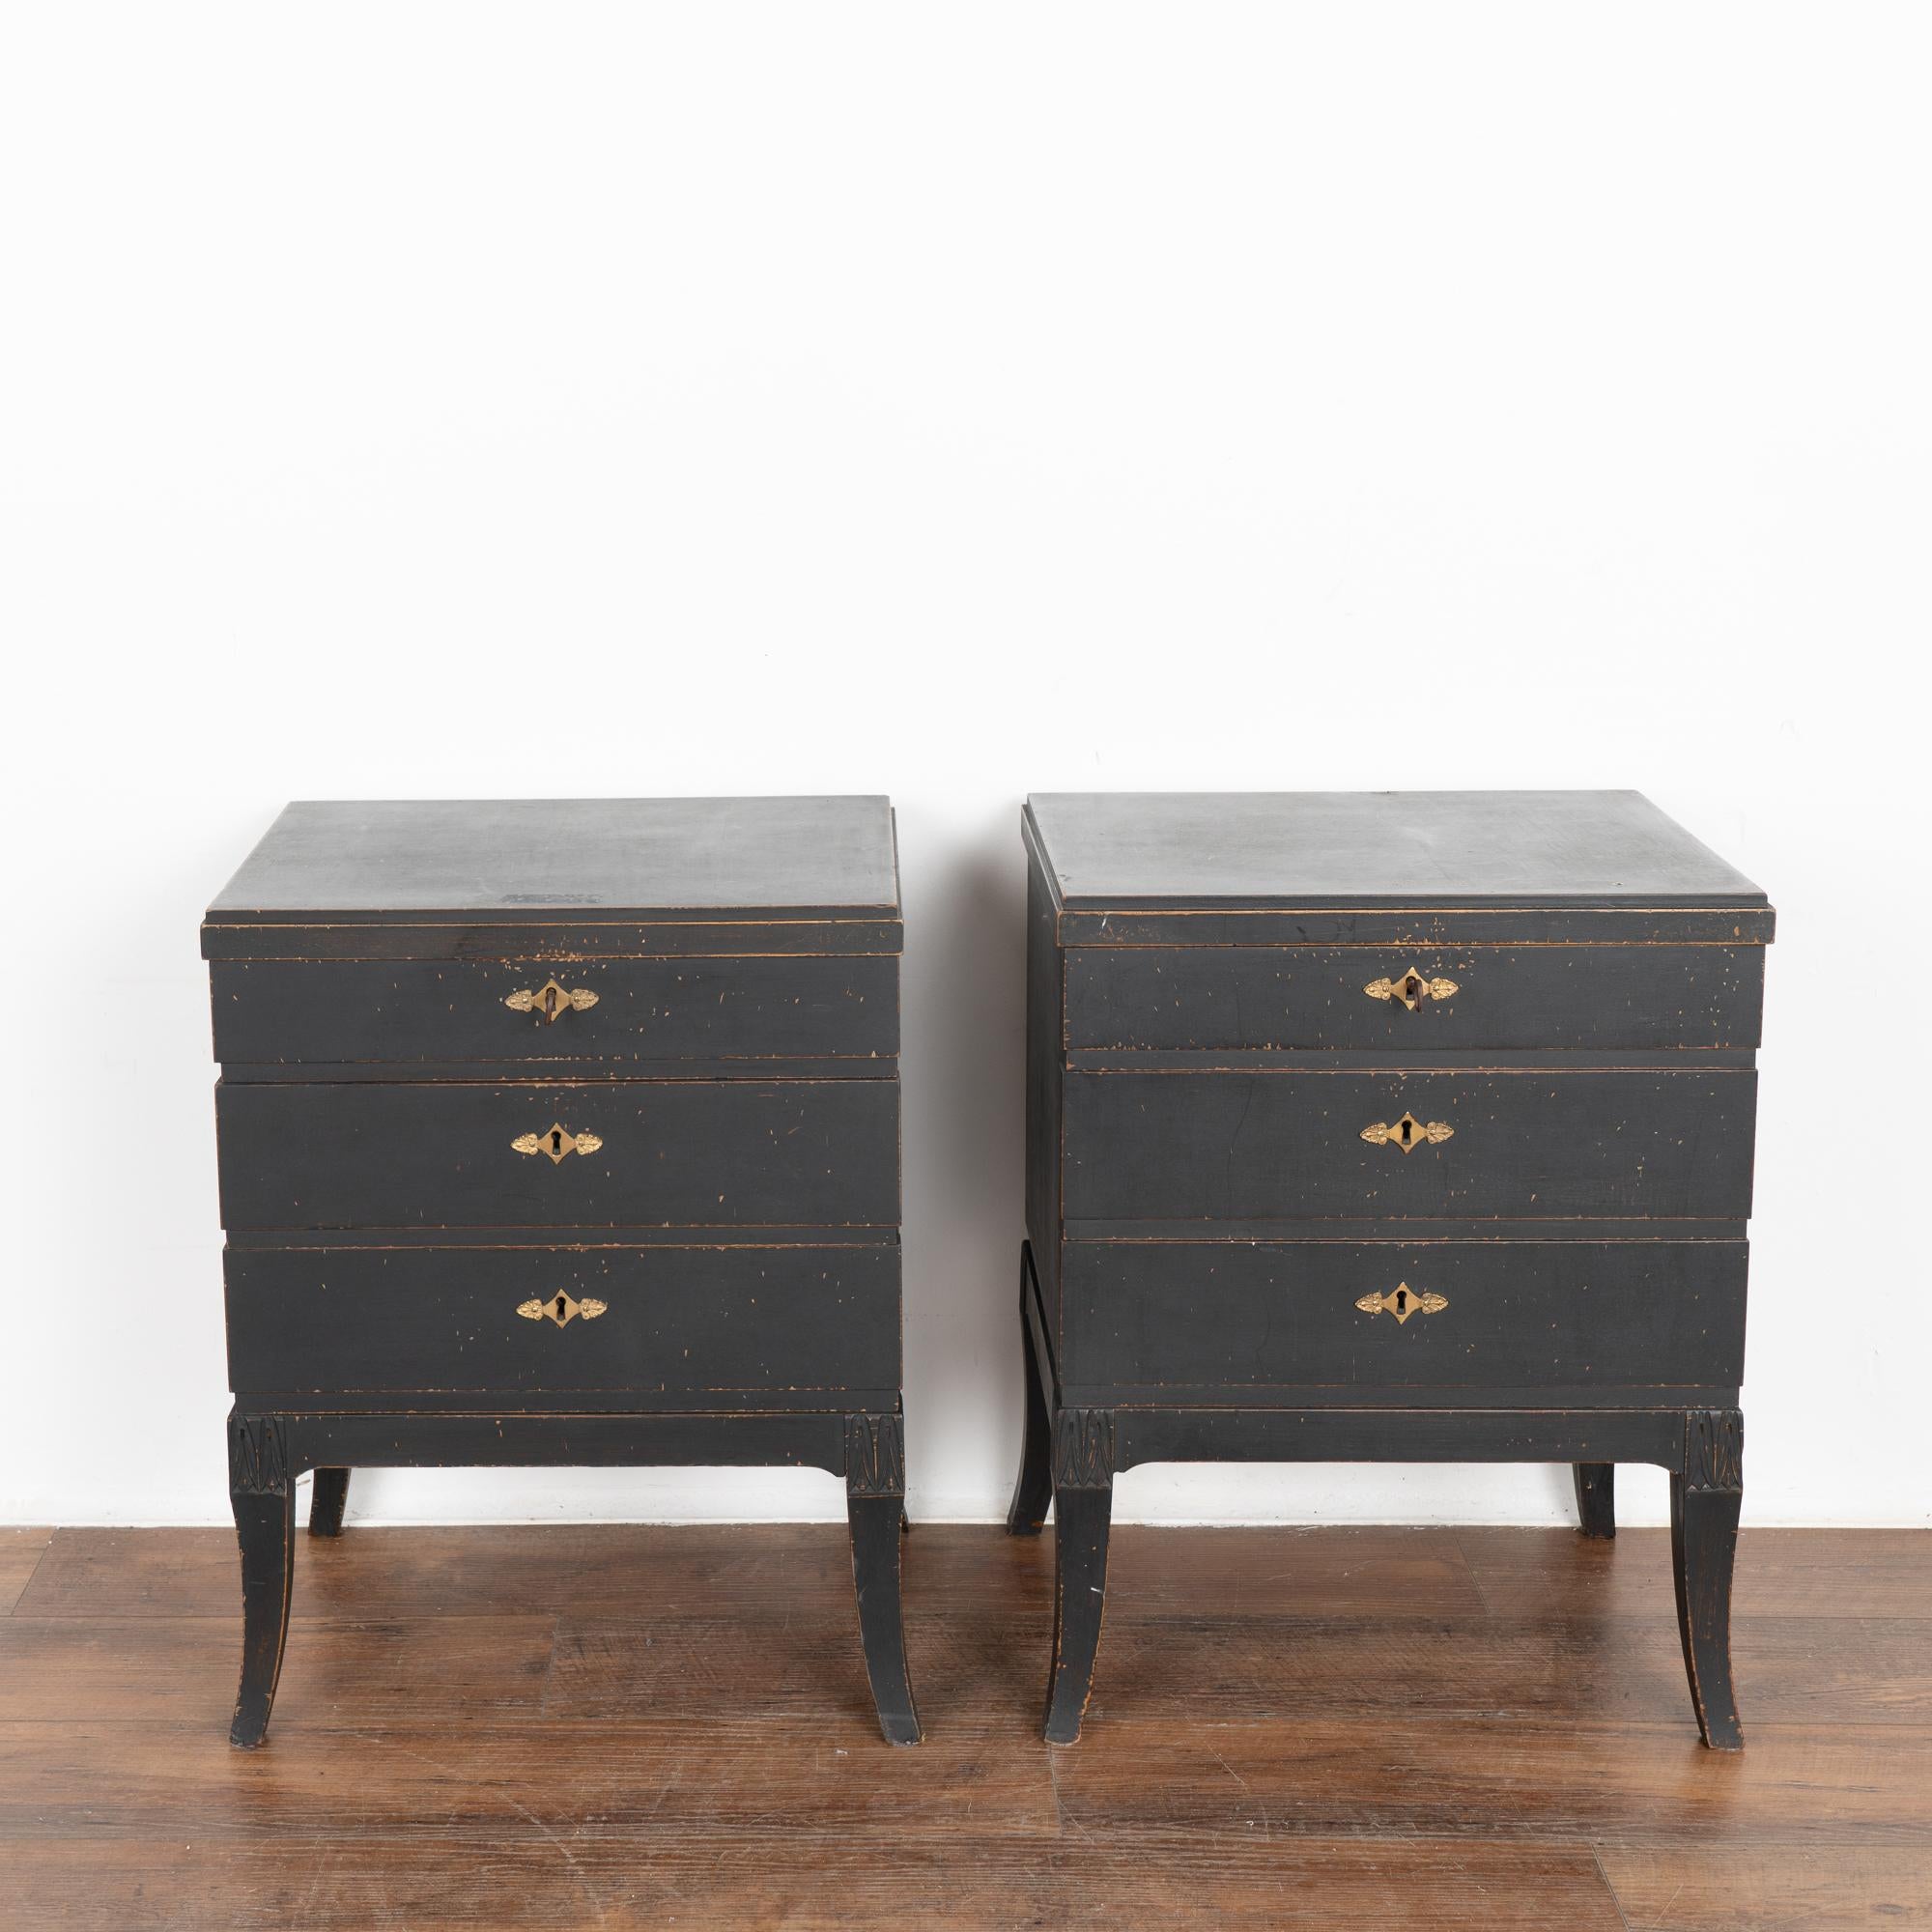 20th Century Pair, Black Painted Pine Chest of Drawers or Nightstands, Sweden circa 1940-60